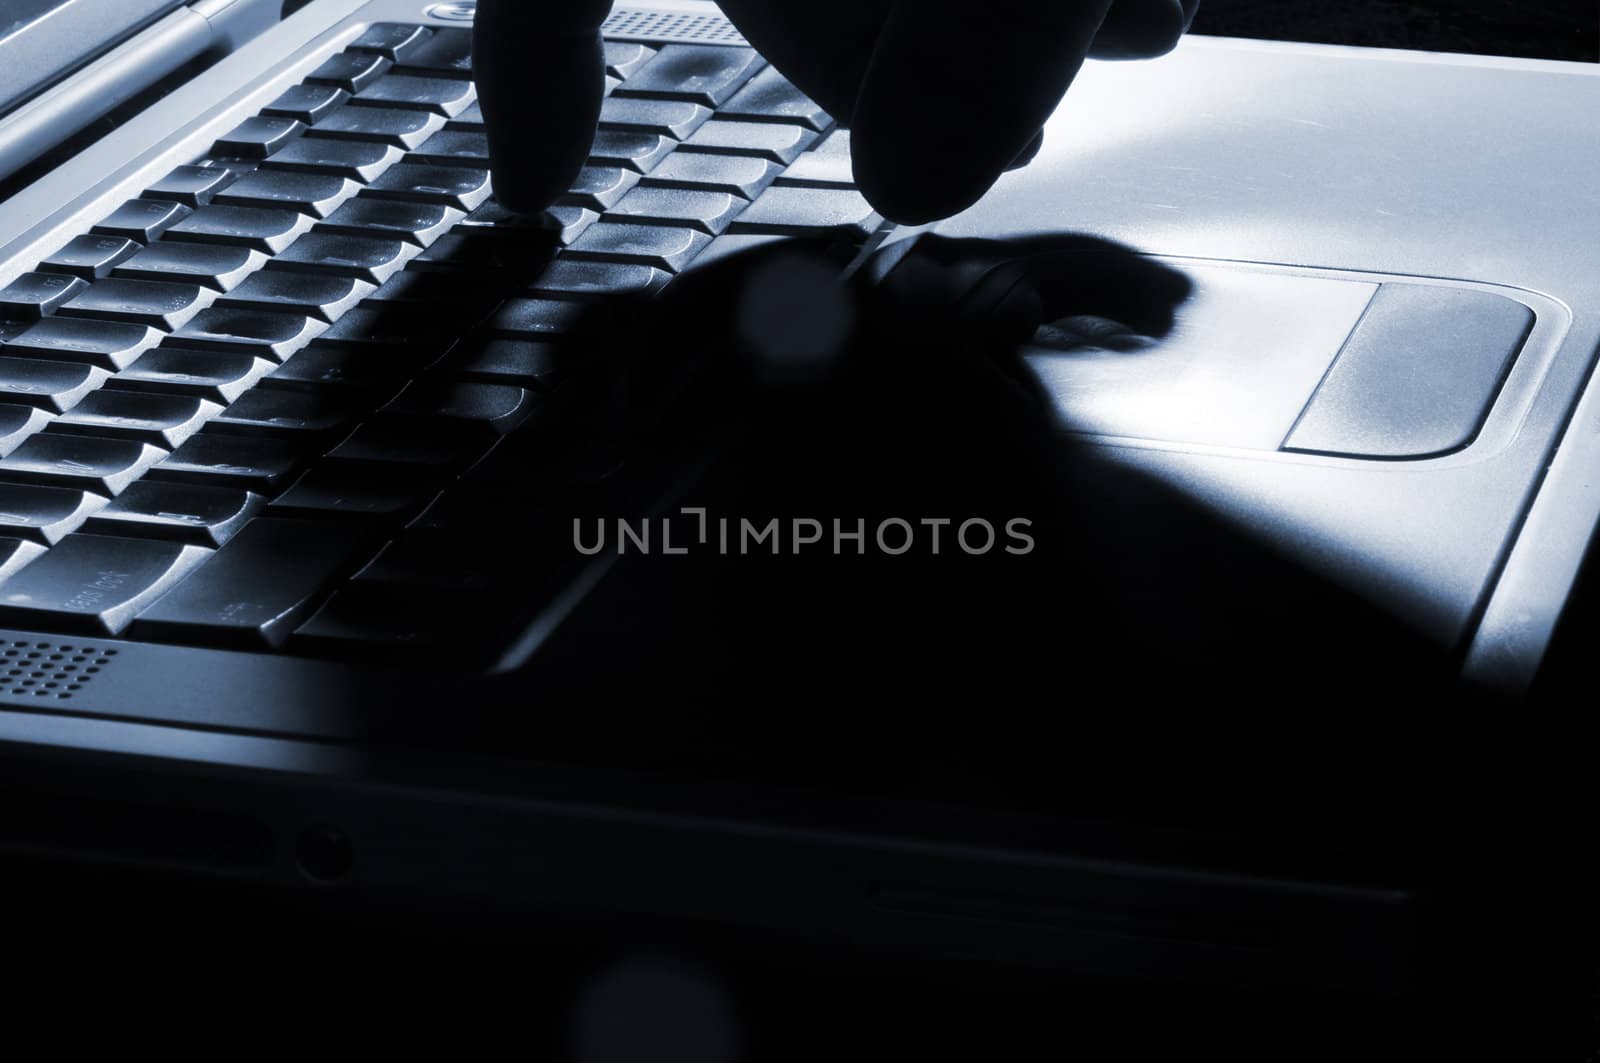 High Contrast Keyboard with hand typing and shadow.